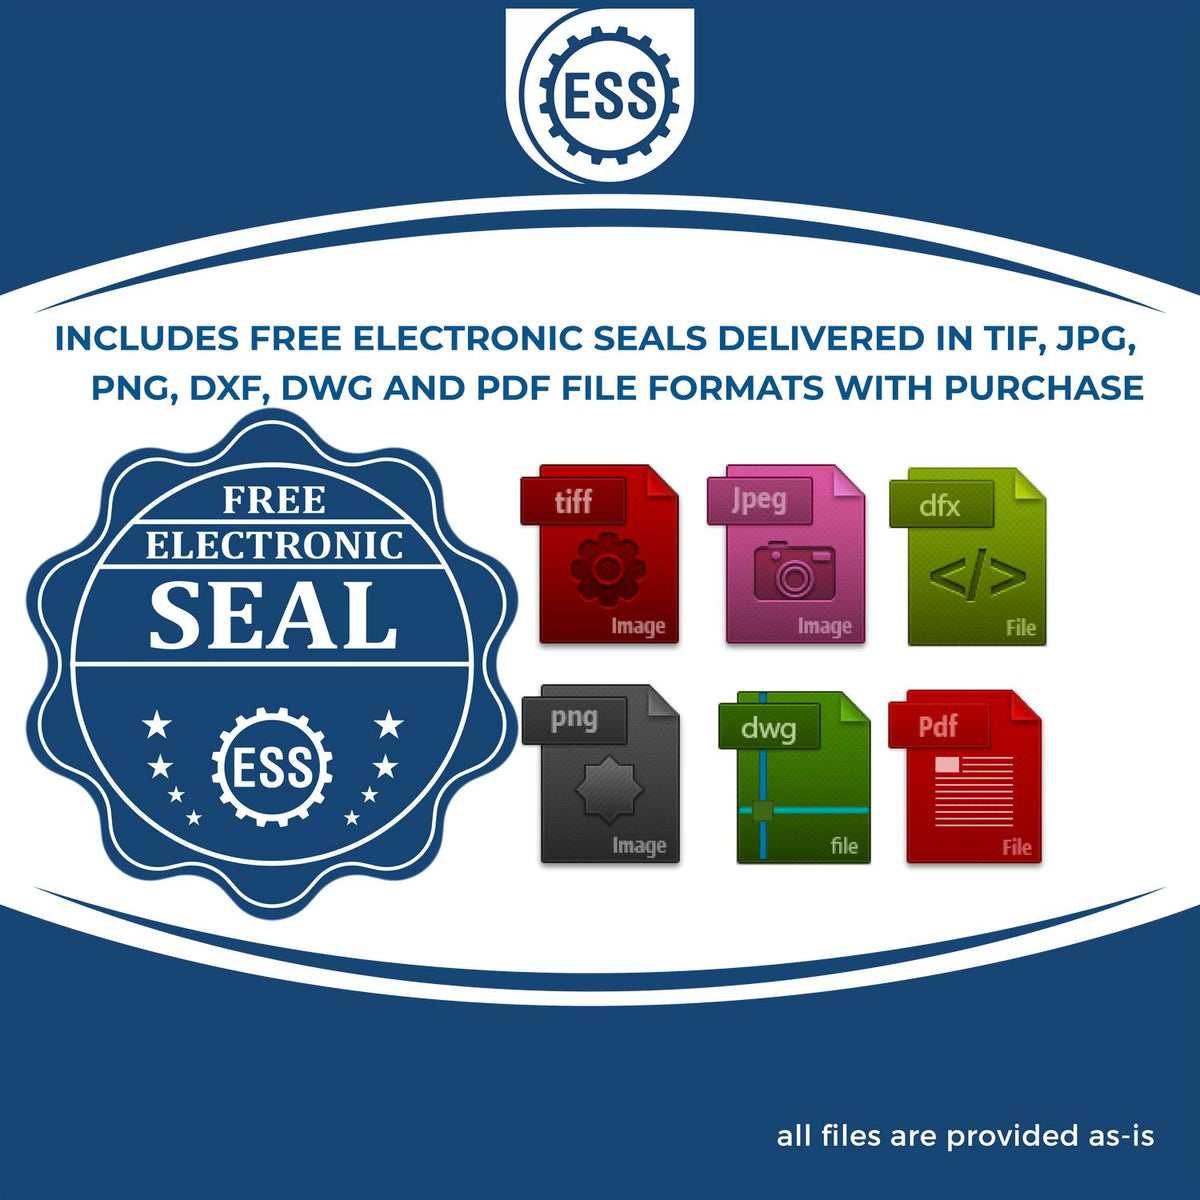 An infographic for the free electronic seal for the Heavy Duty Cast Iron Wyoming Architect Embosser illustrating the different file type icons such as DXF, DWG, TIF, JPG and PNG.